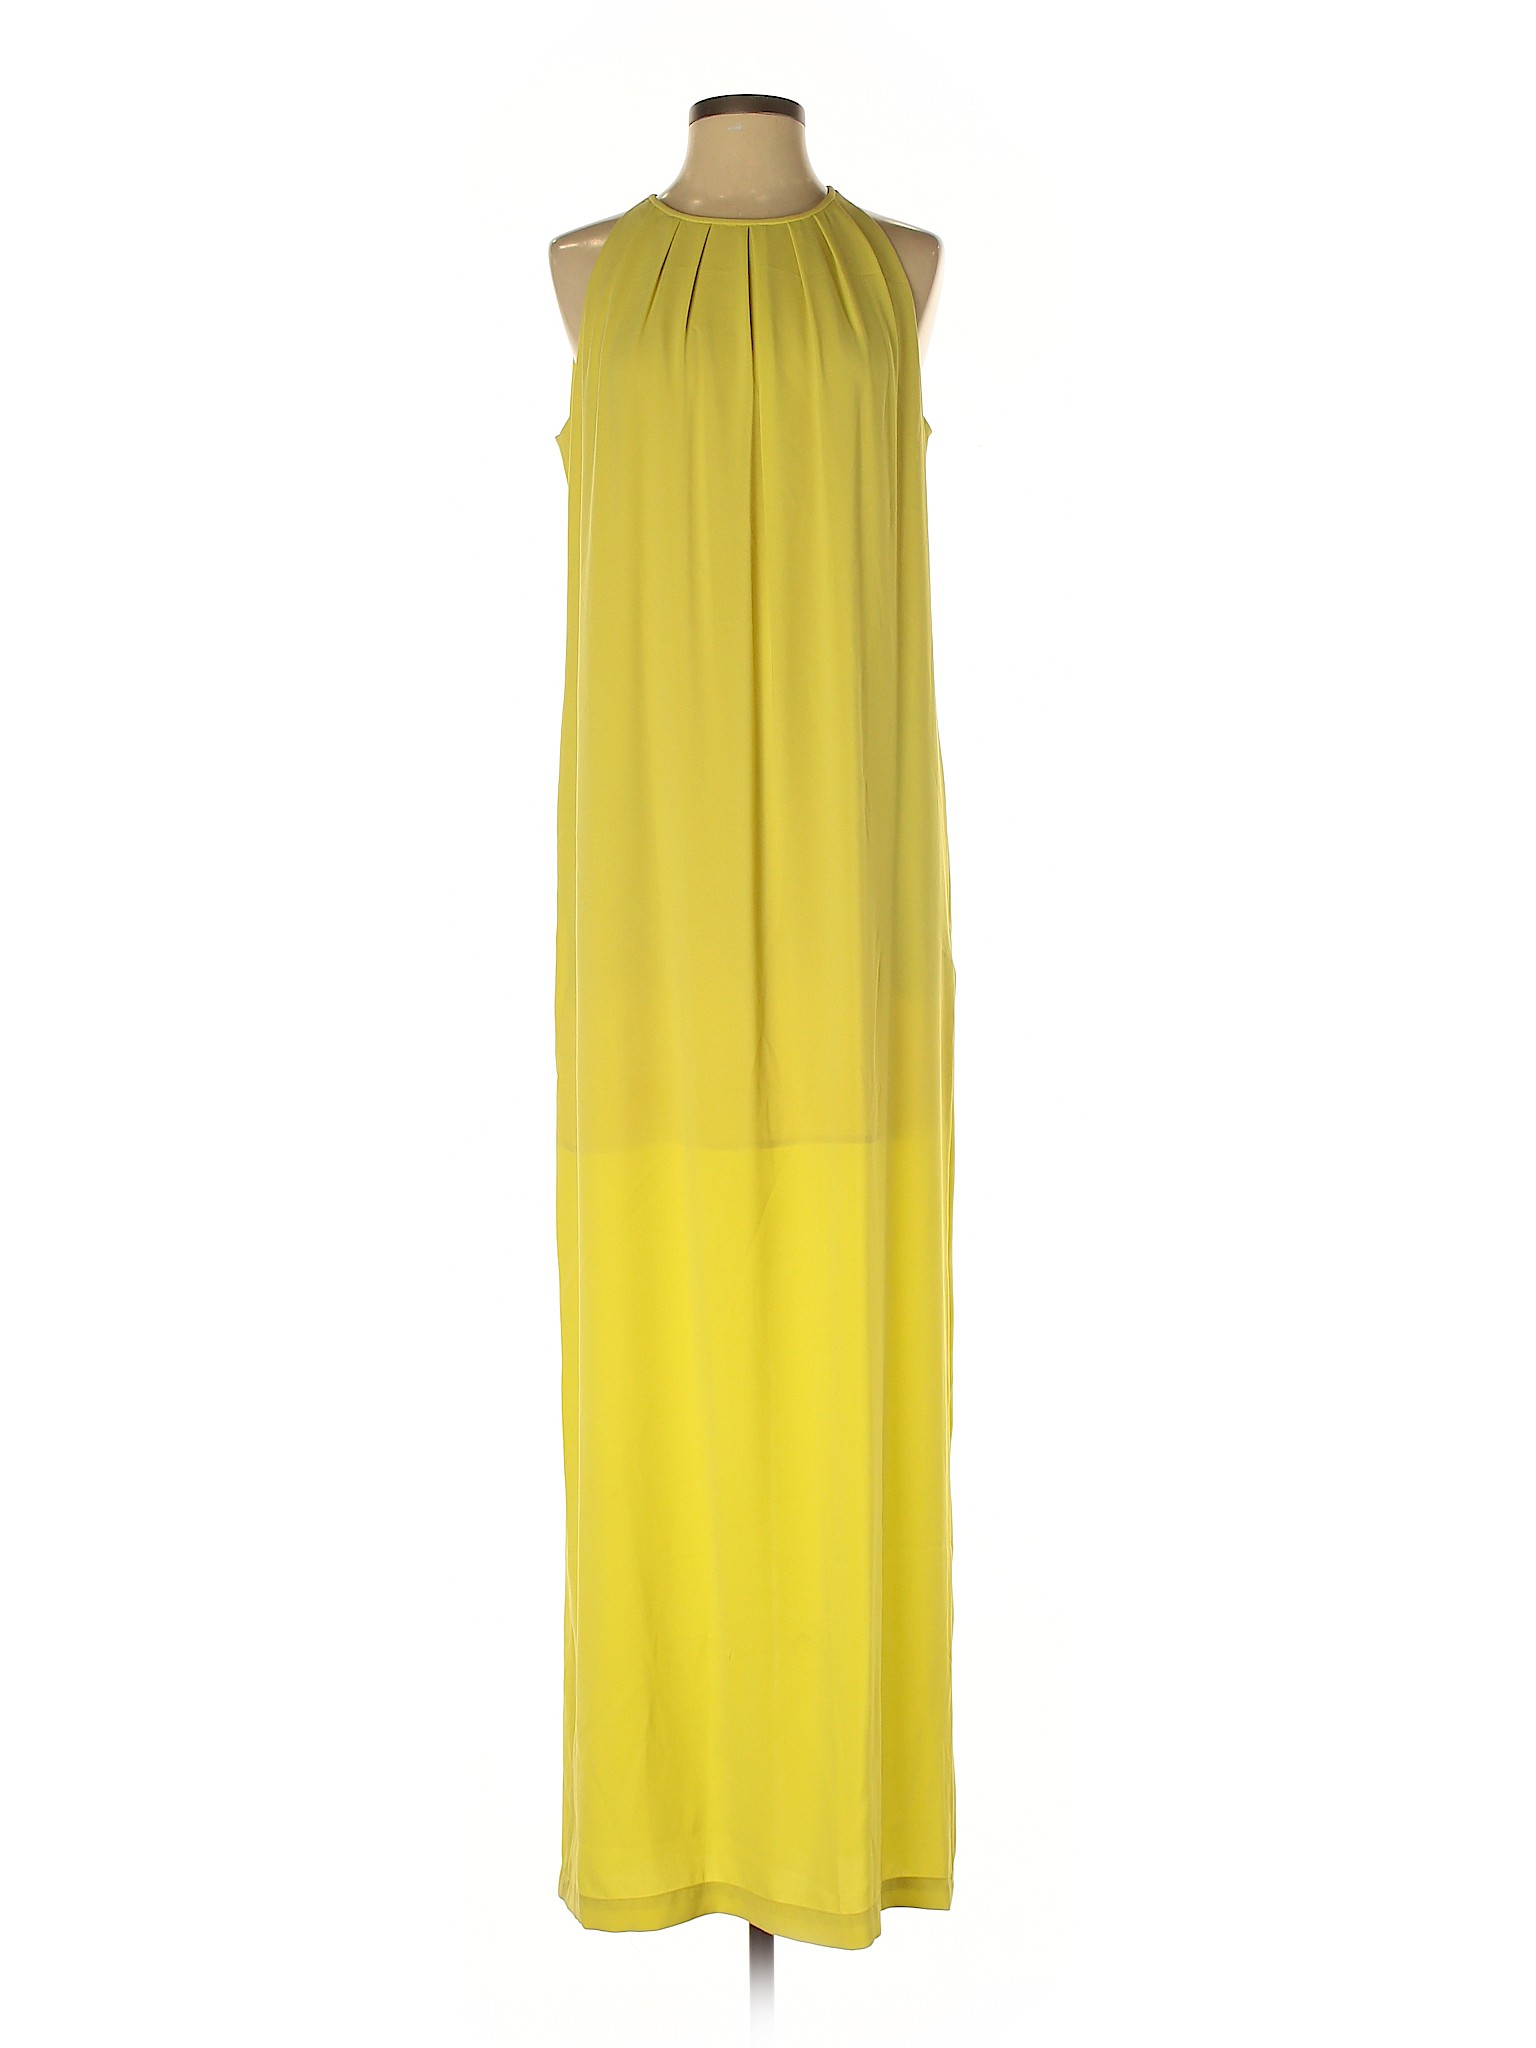 BCBGMAXAZRIA 100% Polyester Solid Yellow Casual Dress Size S - 87% off ...